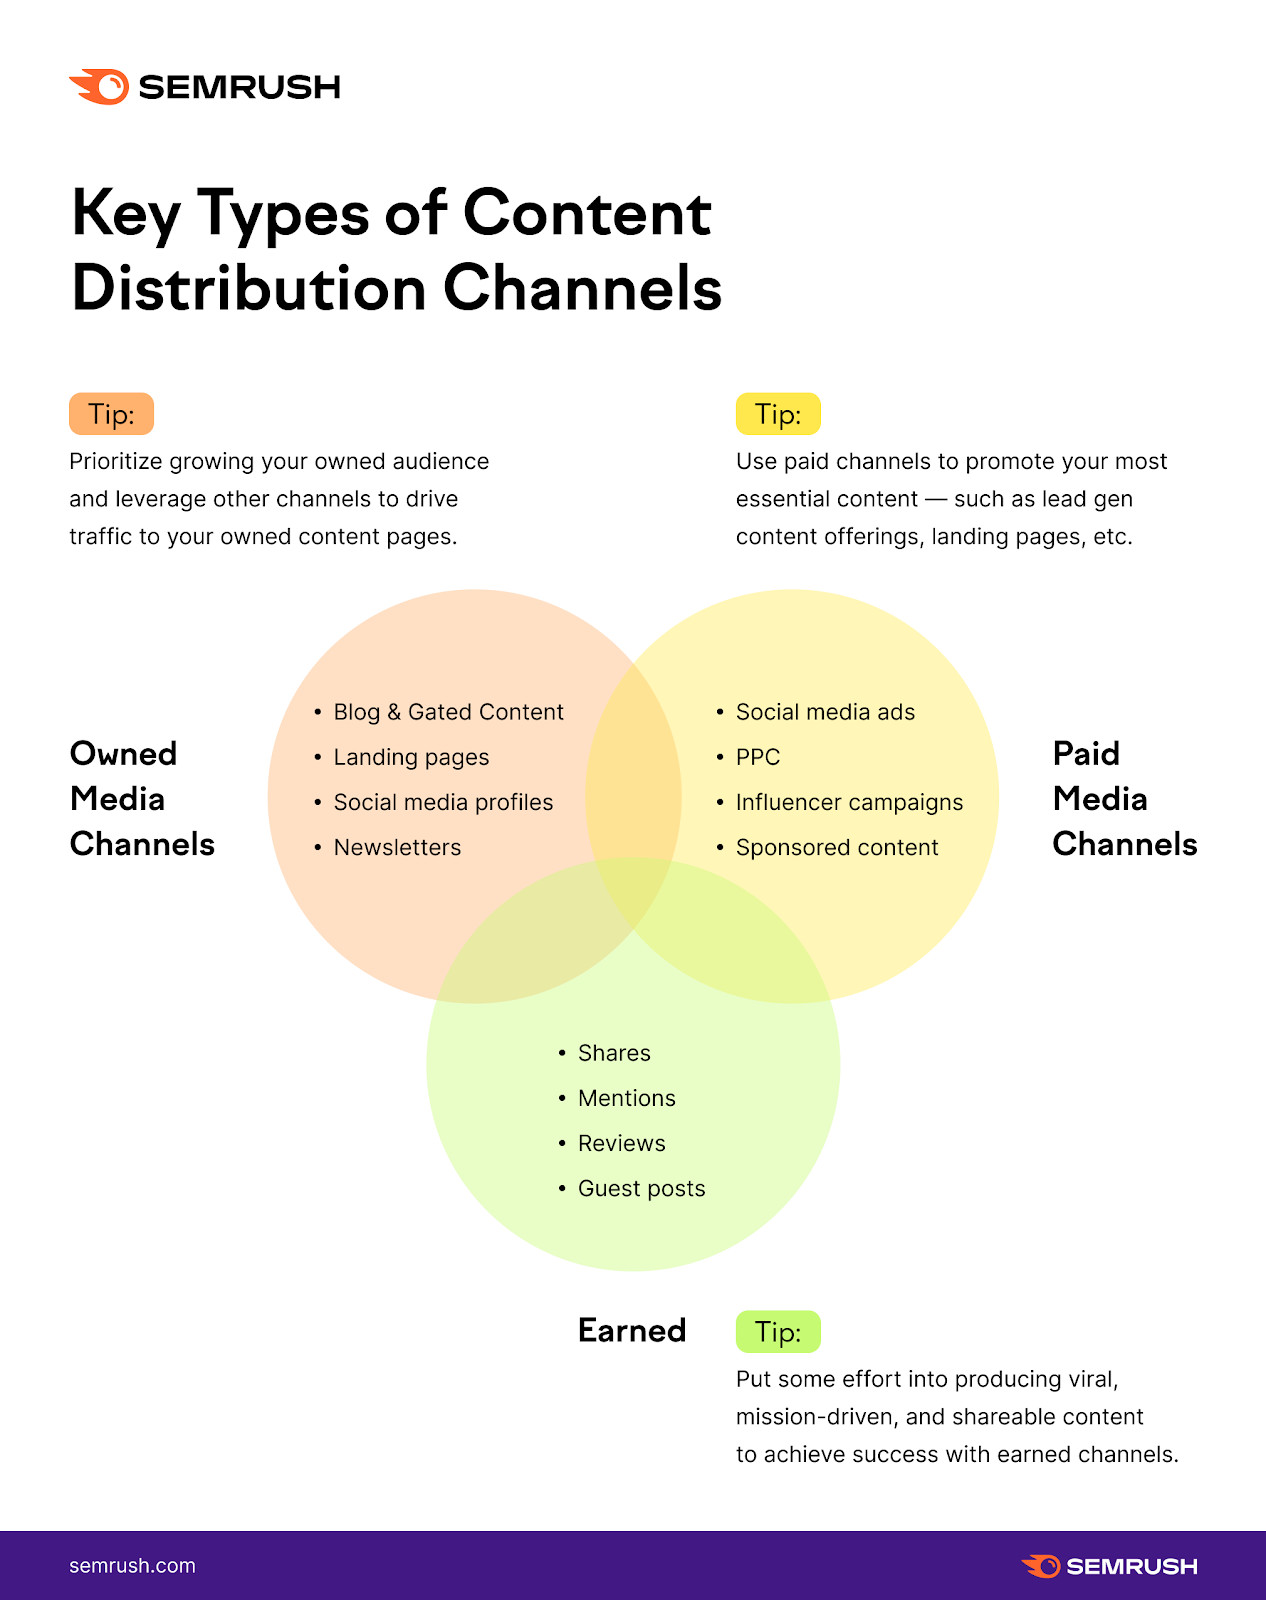 An infographic on key types of content distribution channels